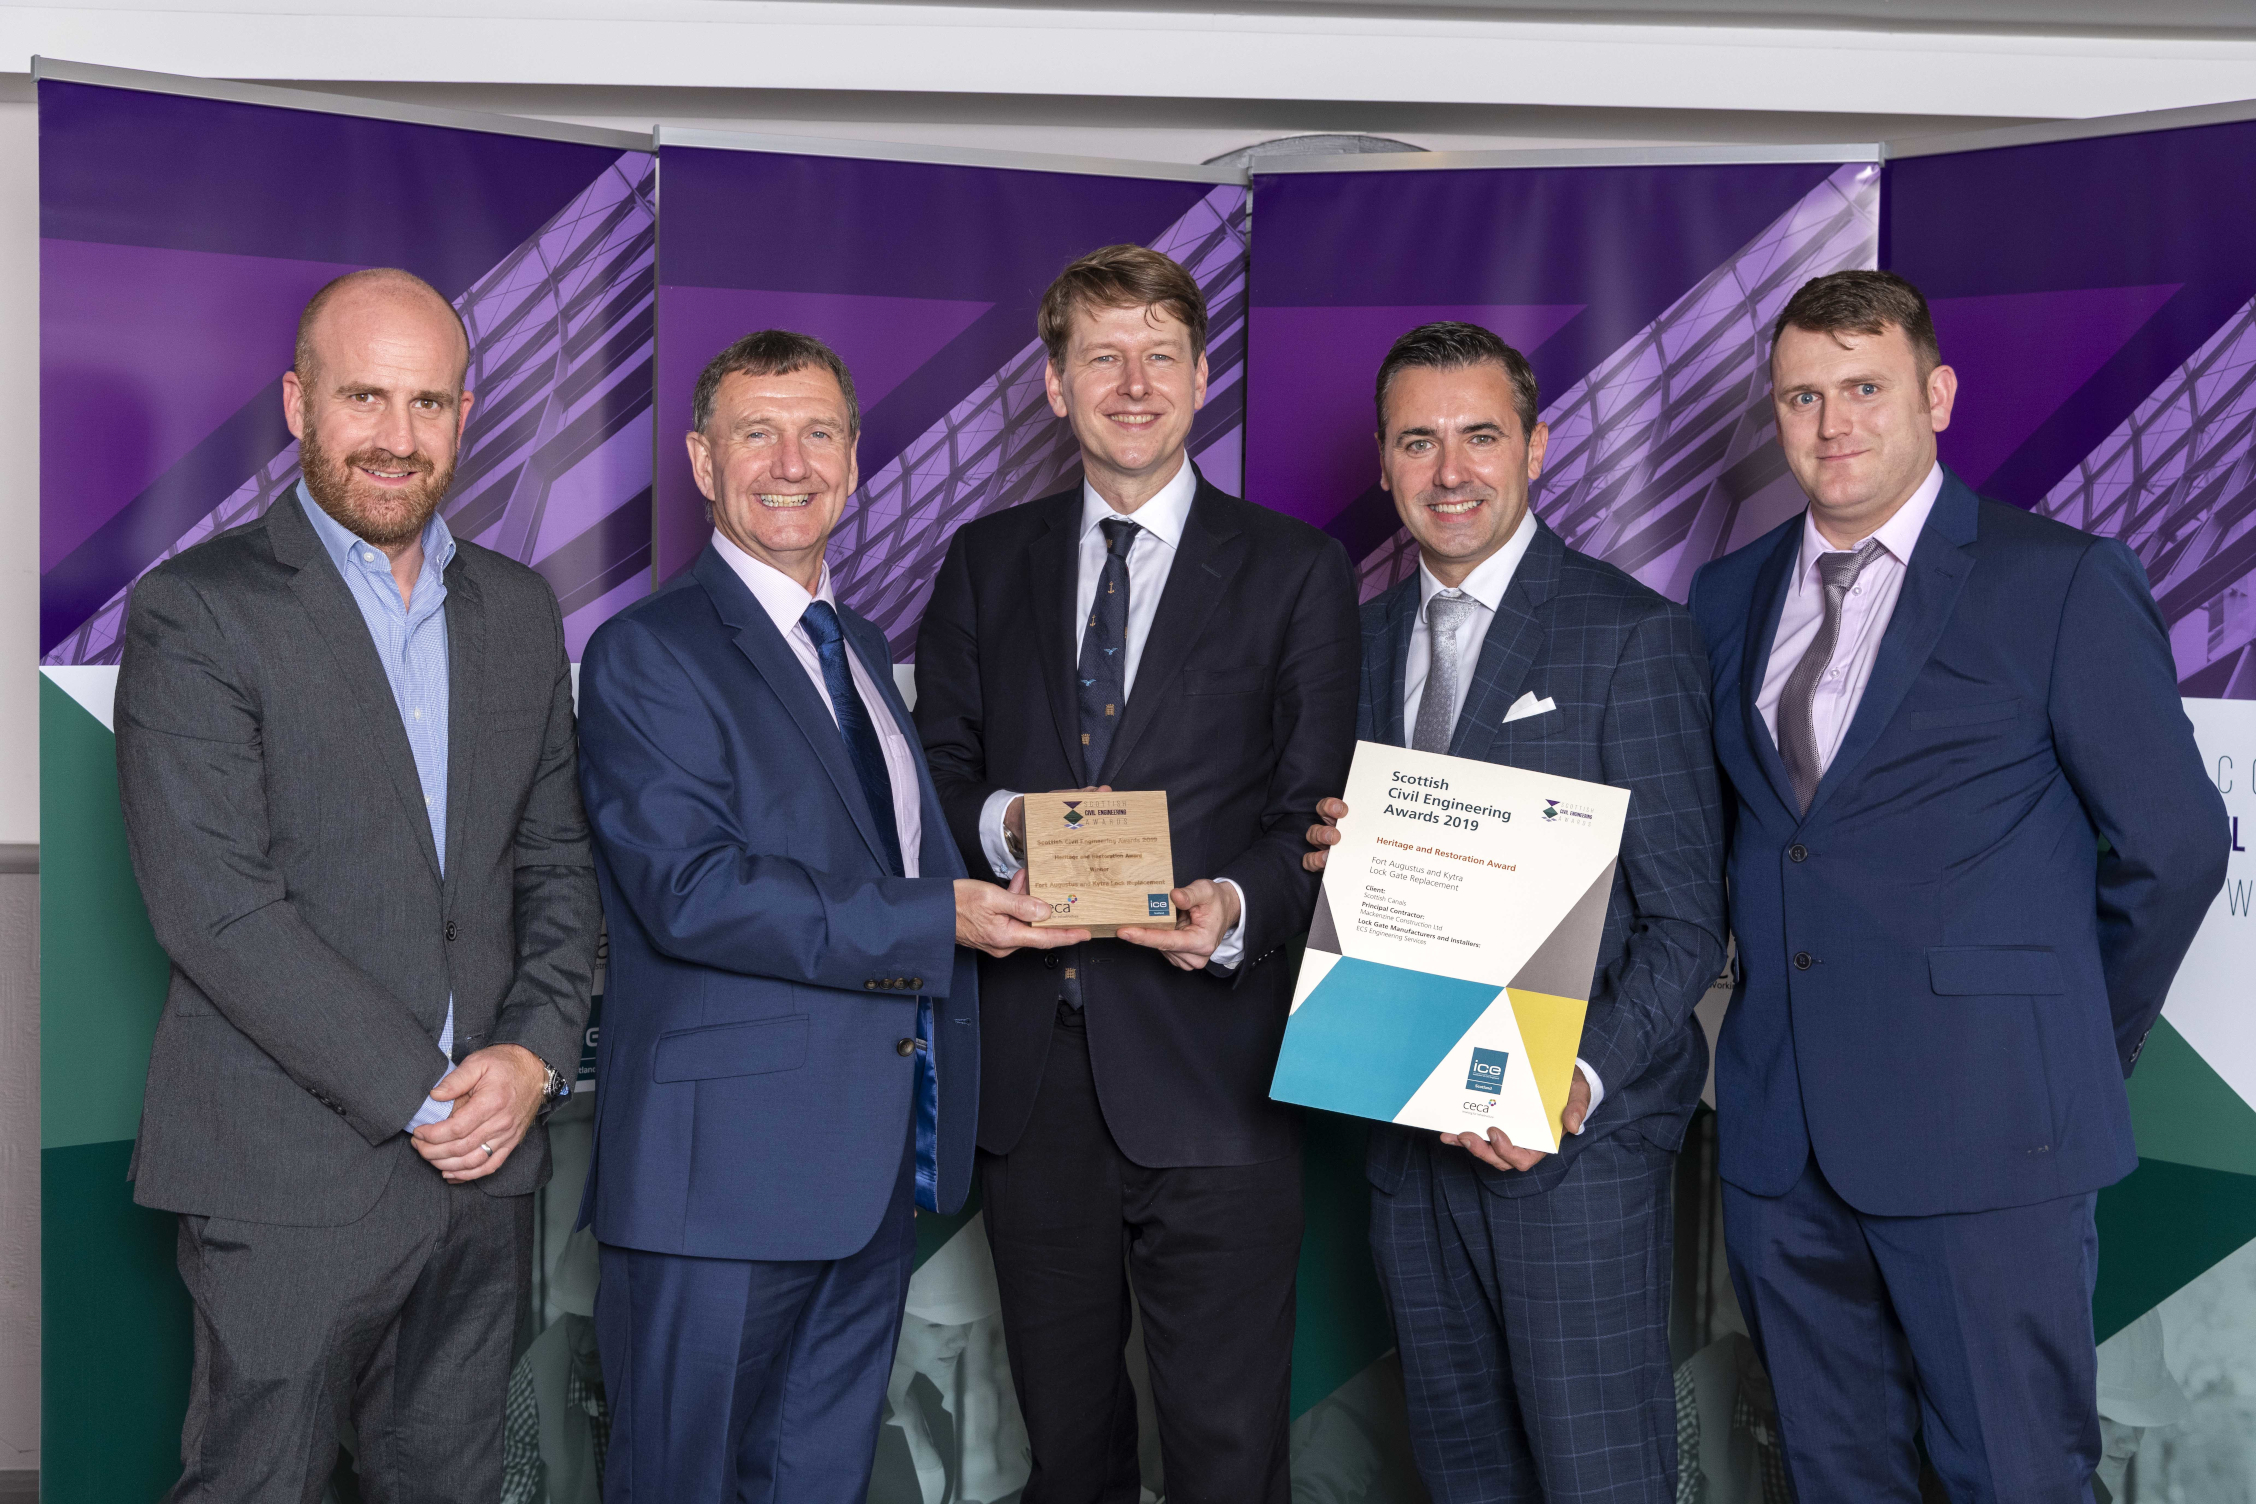 ECS Engineering Services and Mackenzie Construction receive the 2019 CECA (Civil Engineering Contractors’ Association) Heritage and Restoration Award from Robin Walker MP.